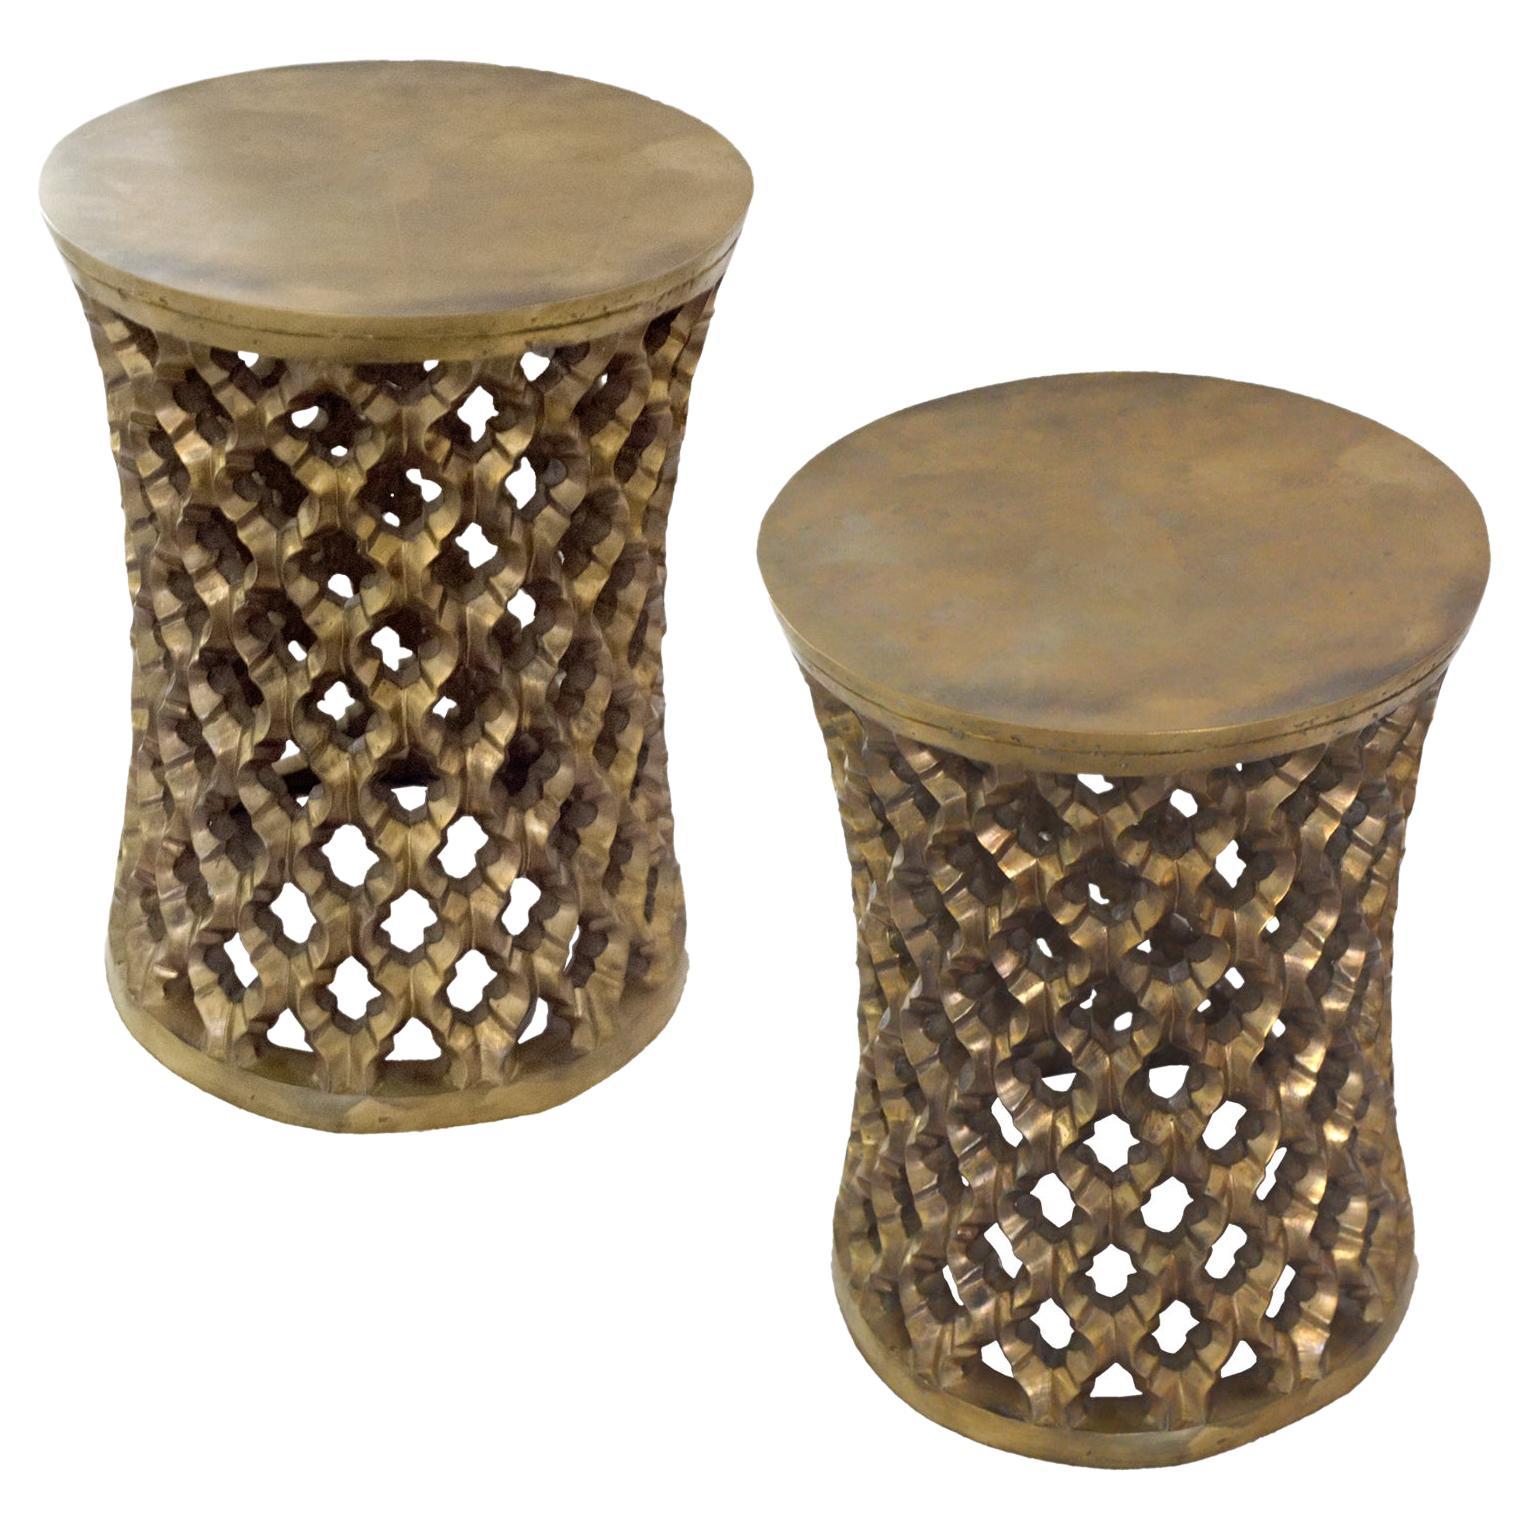 Set of Two Jour Round Jali Tables in Brass by Paul Mathieu for Stephanie Odegard